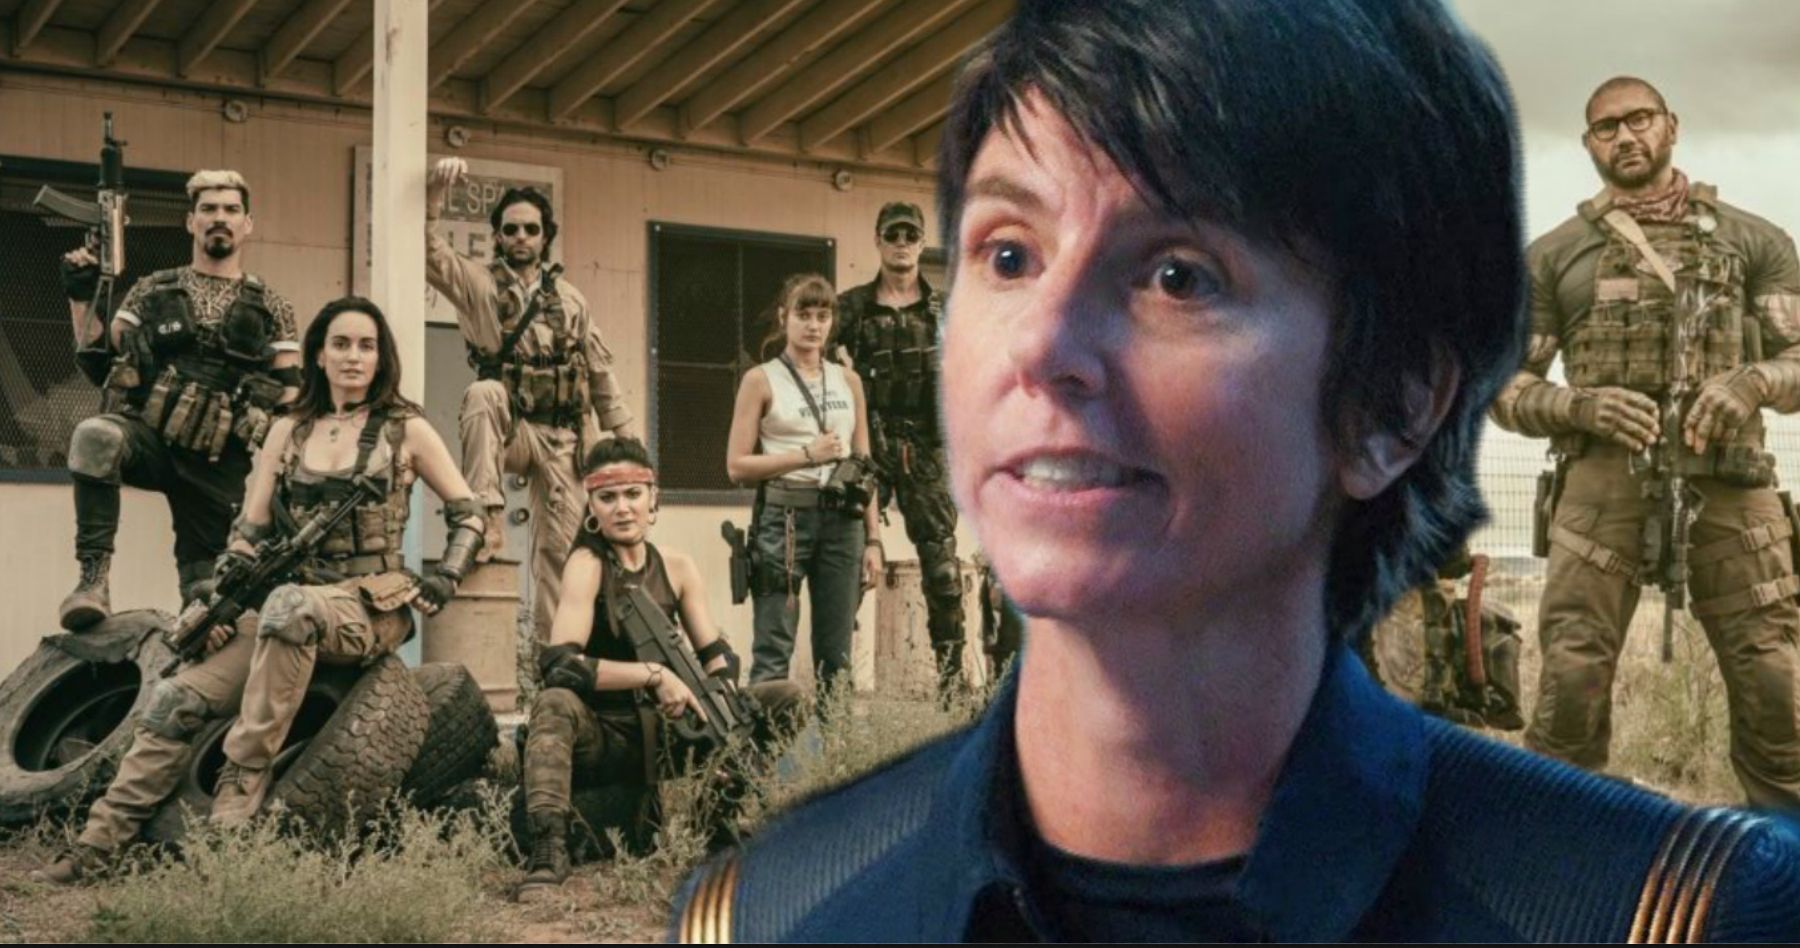 Tig Notaro Replaces Chris D'Elia During Zack Snyder's Army of the Dead Reshoots